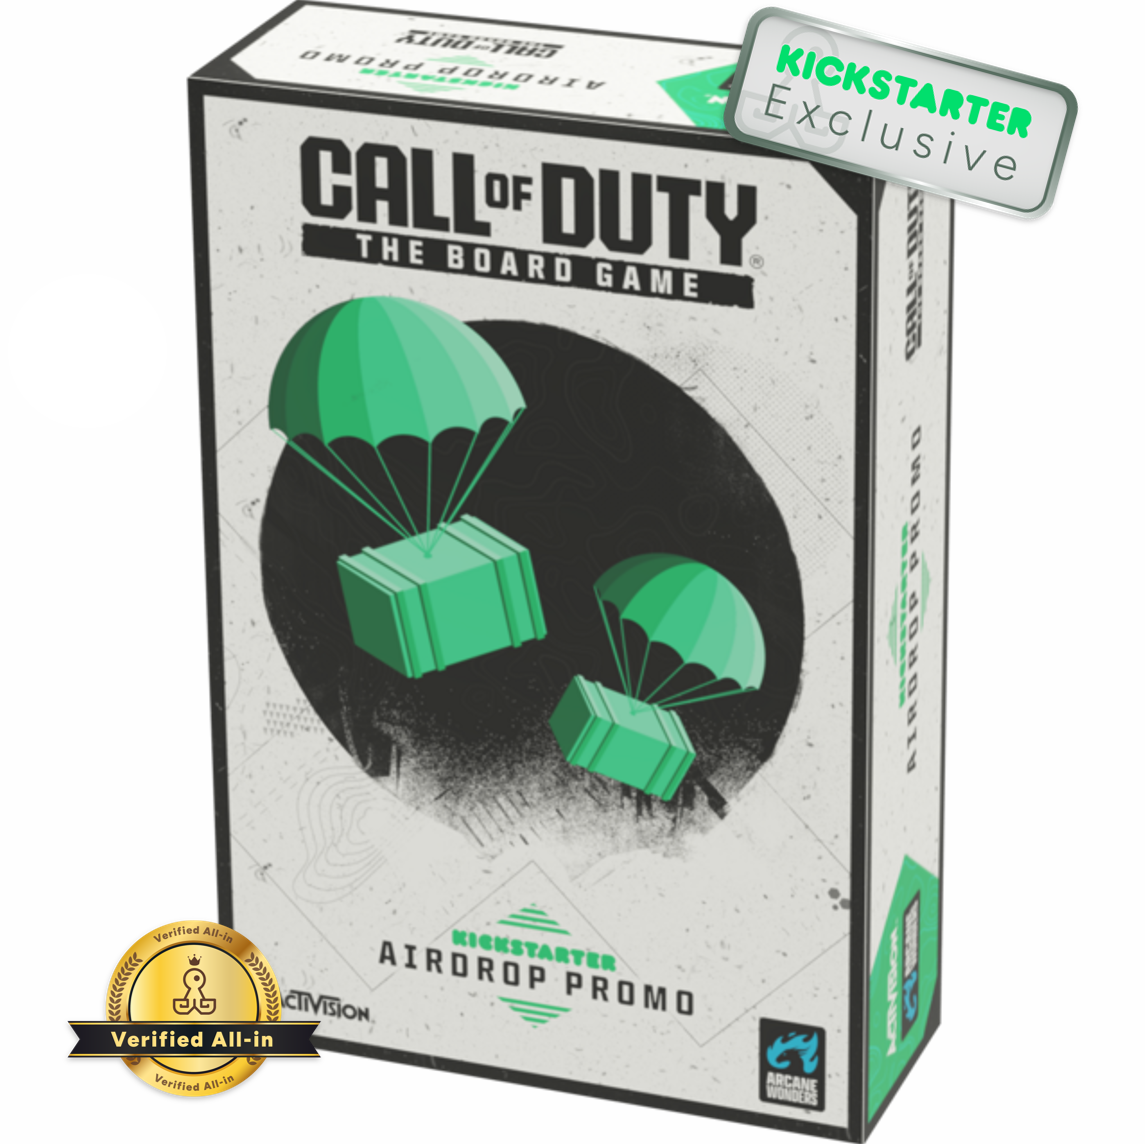 Kickstarter Exclusive Call of Duty: The Board Game Airdrop Promo Box Expansion